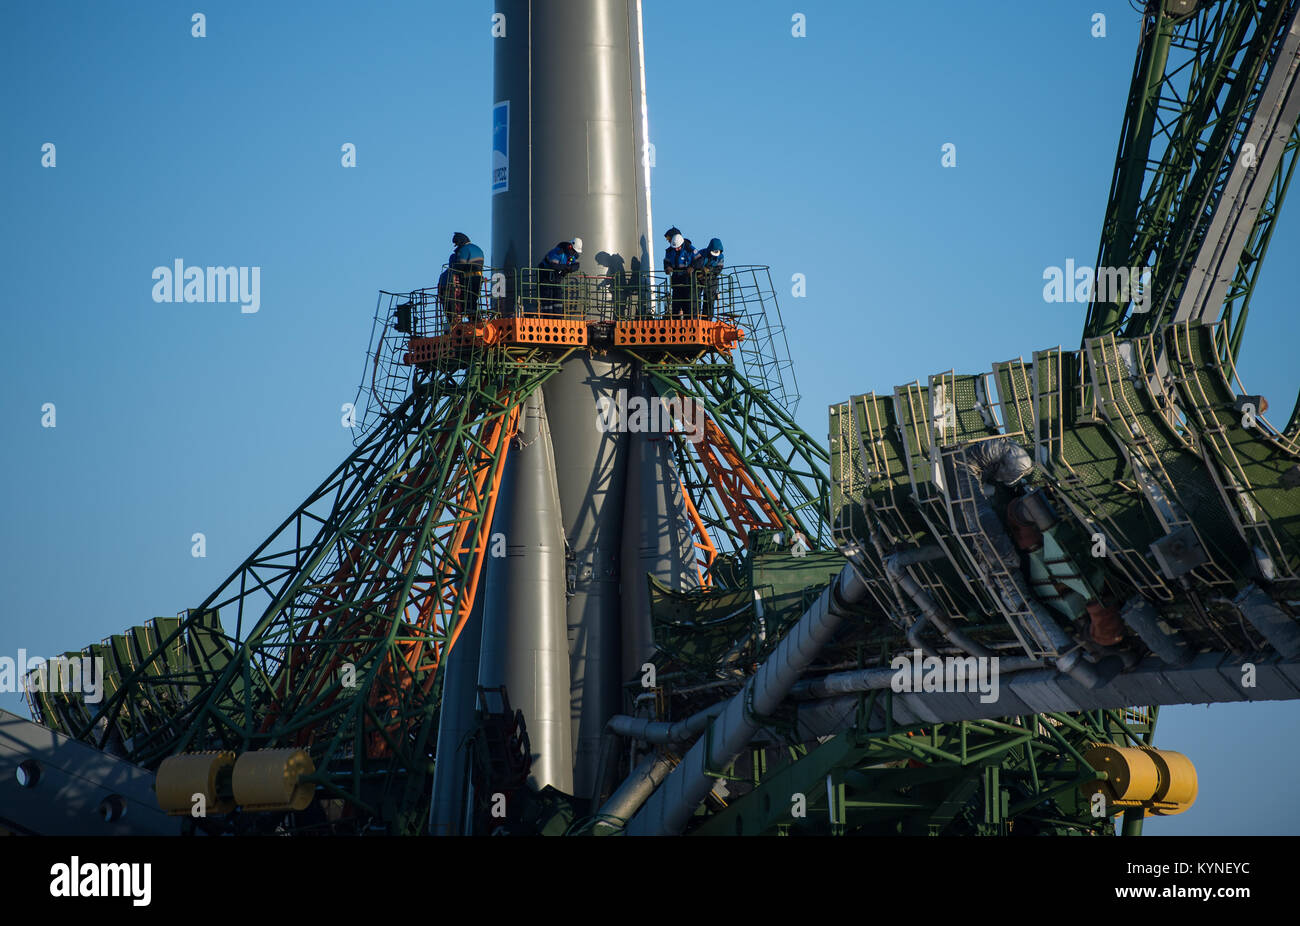 Workers are seen on a gantry as the service structure arms are raised around the Soyuz rocket, Friday, Dec. 15, 2017 at the Baikonur Cosmodrome in Kazakhstan. Expedition 54 Soyuz Commander Anton Shkaplerov of Roscosmos, flight engineer Scott Tingle of NASA, and flight engineer Norishige Kanai of Japan Aerospace Exploration Agency (JAXA) are scheduled to launch at 2:21 a.m. Eastern Time (1:21 p.m. Baikonur time) on Dec. 17 and will spend the next five months living and working aboard the International Space Station.  Photo Credit: (NASA/Joel Kowsky) Stock Photo